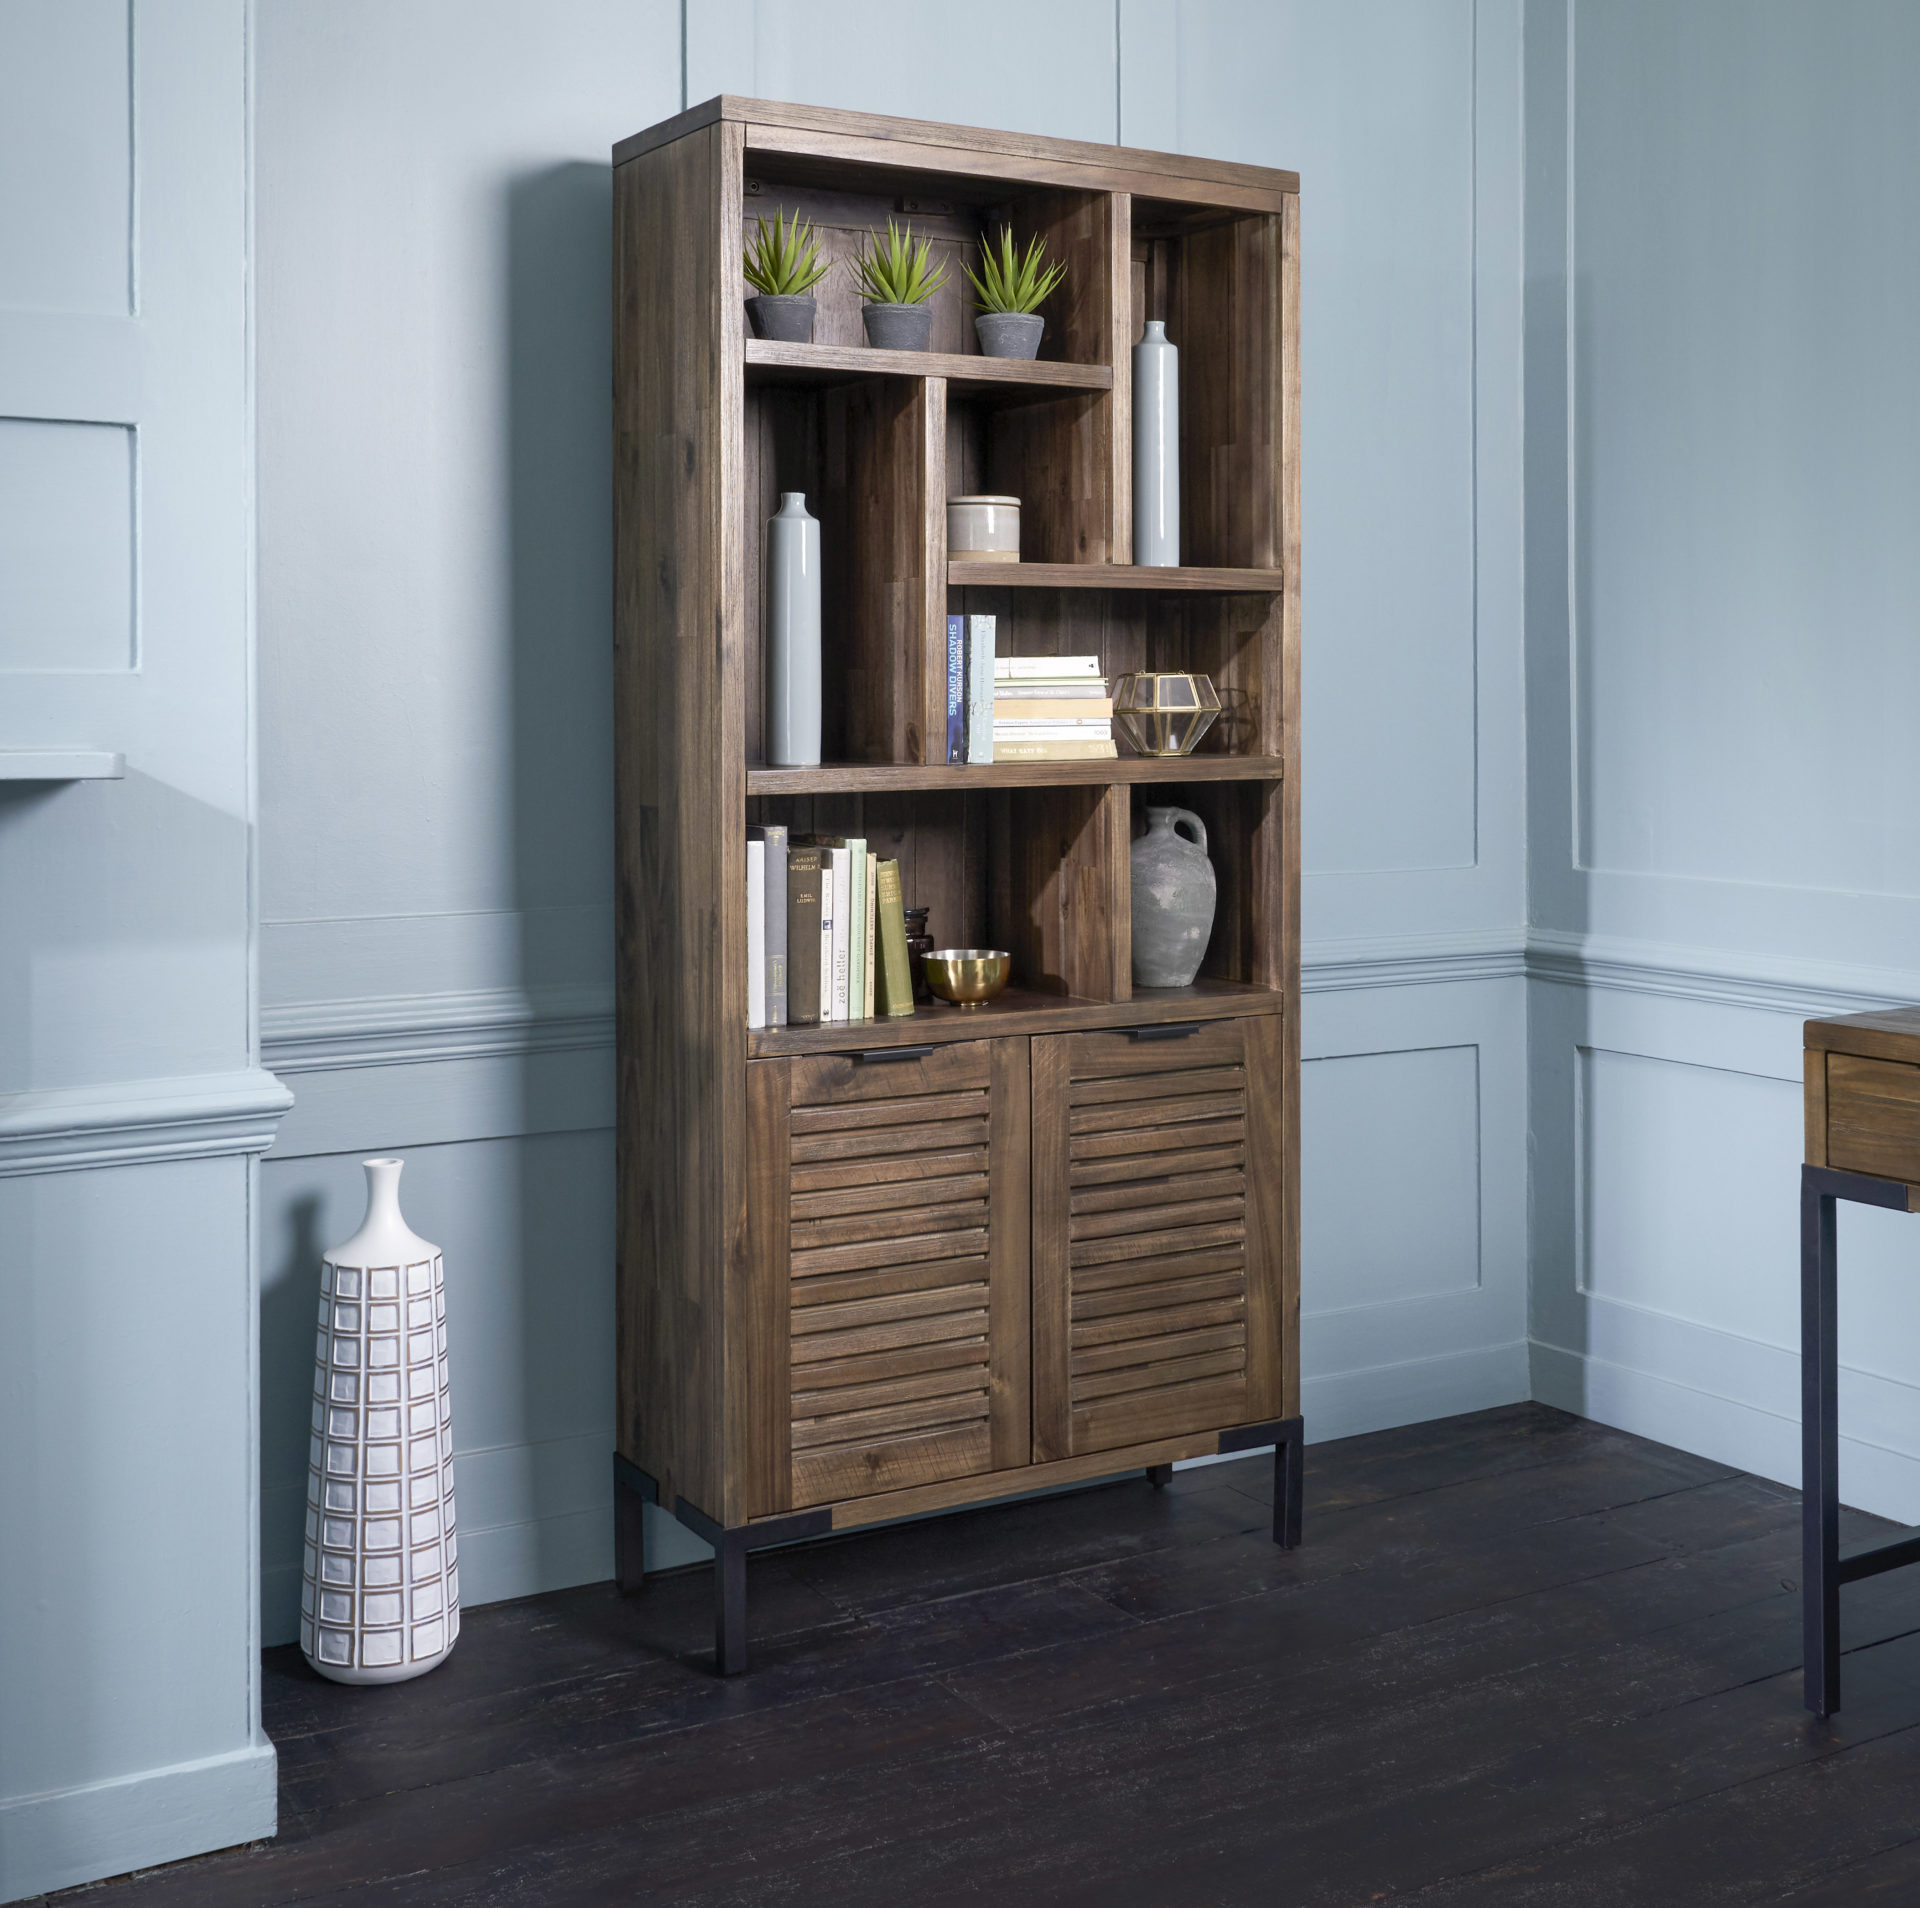 Introducing our new Detroit collection by Oak Furnitureland | The Oak